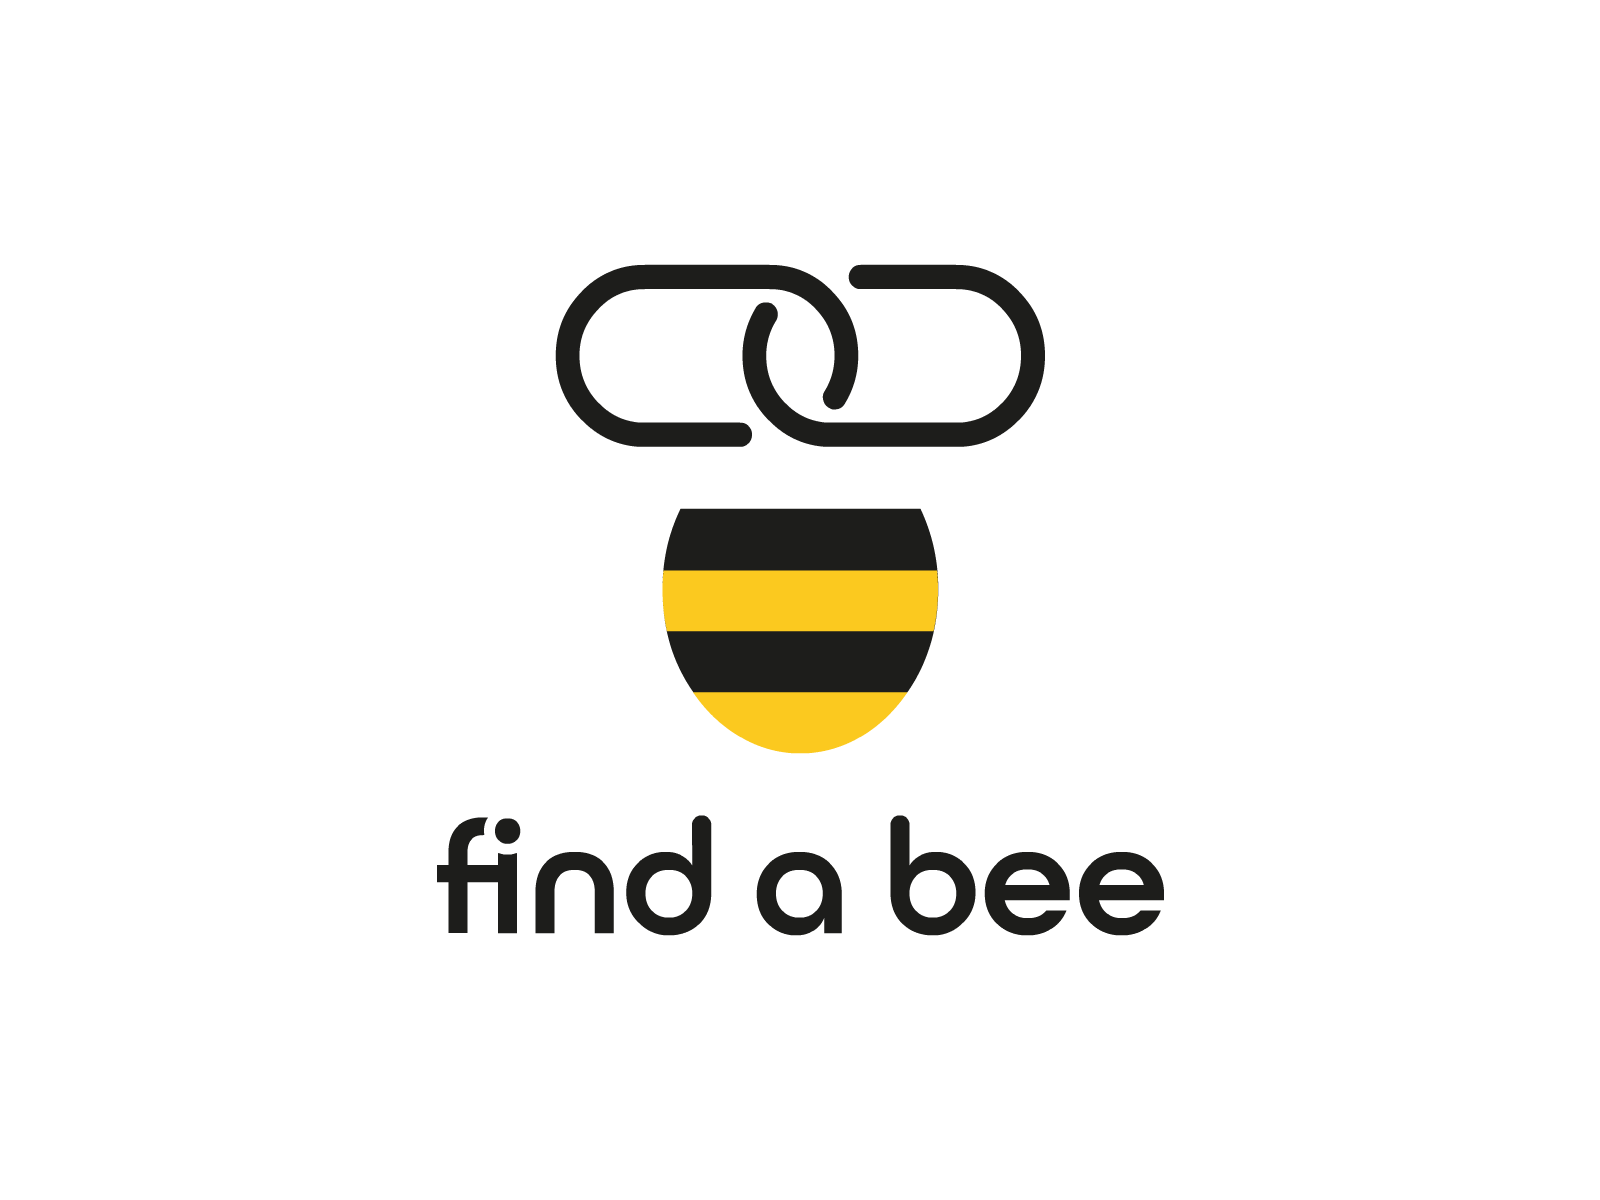 Find a bee